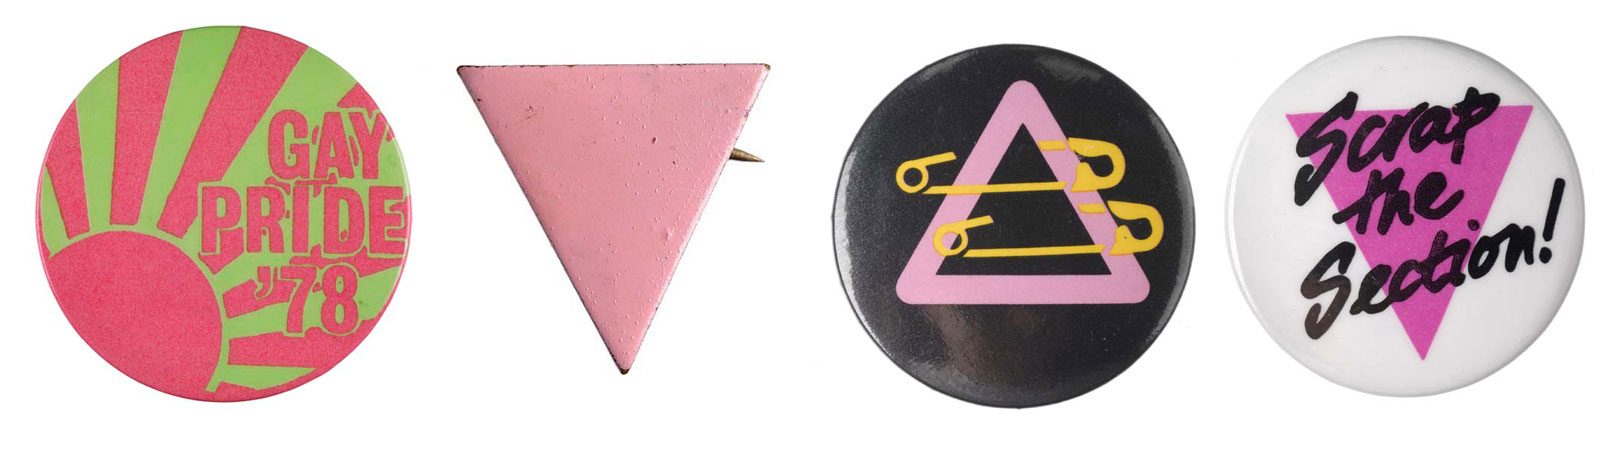 The pink triangle emblem is a reference to the cloth badges that homosexual prisoners were forced to wear on their uniforms in Nazi concentration camps.